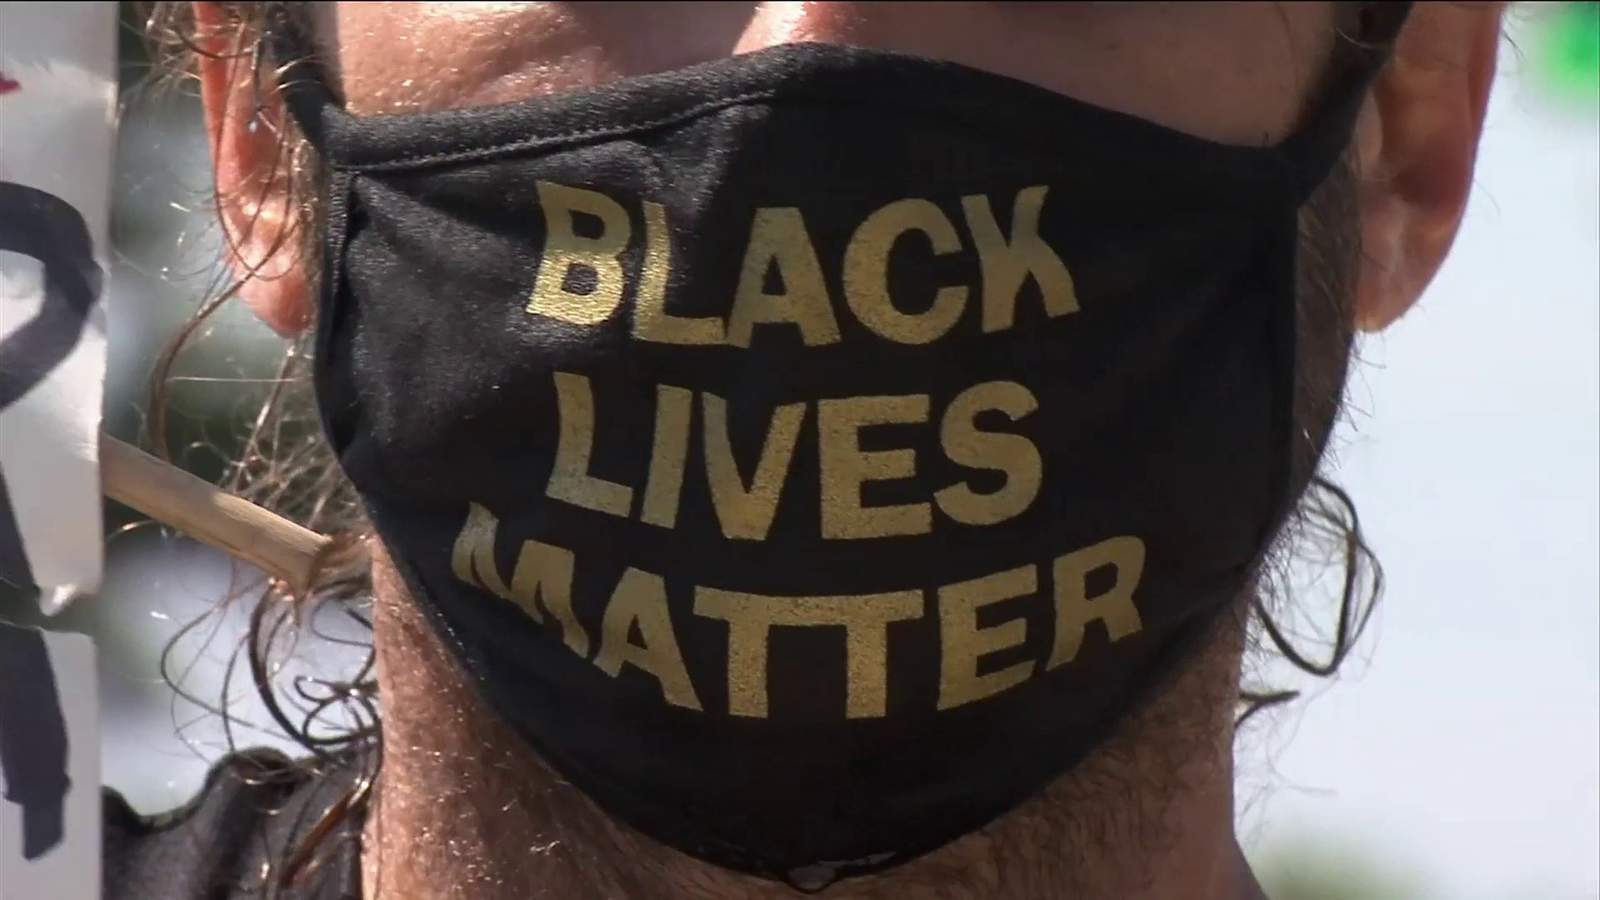 Black Lives Matter, Blue Lives Matter protesters peacefully face off in Clay County